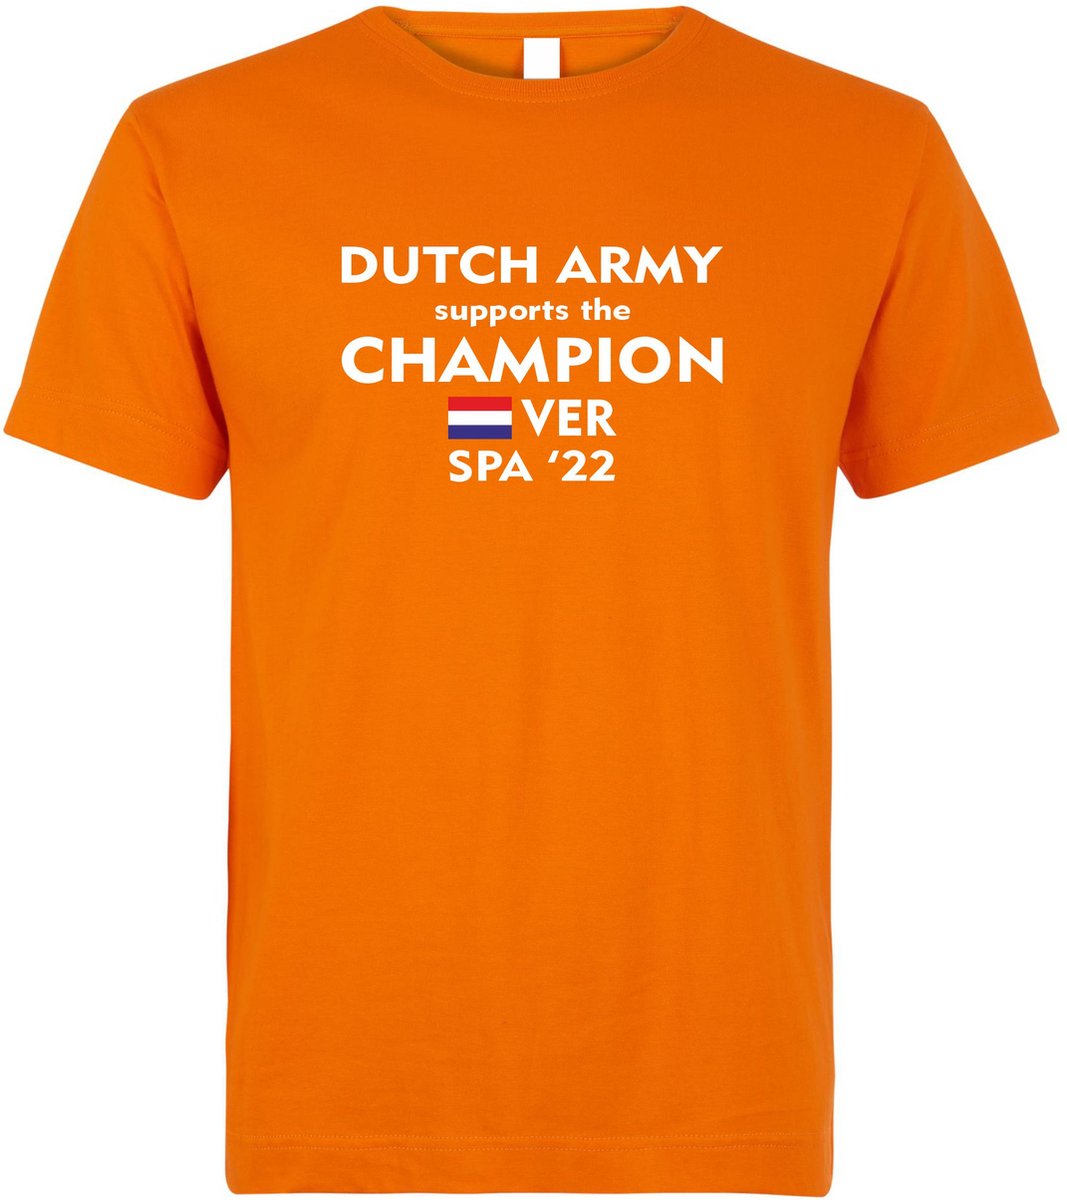 T-shirt kinderen Dutch Army supports the Champion Spa 22 | Max Verstappen / Red Bull Racing / Formule 1 fan | Grand Prix Circuit Spa-Francorchamps | kleding shirt | Oranje | maat 92